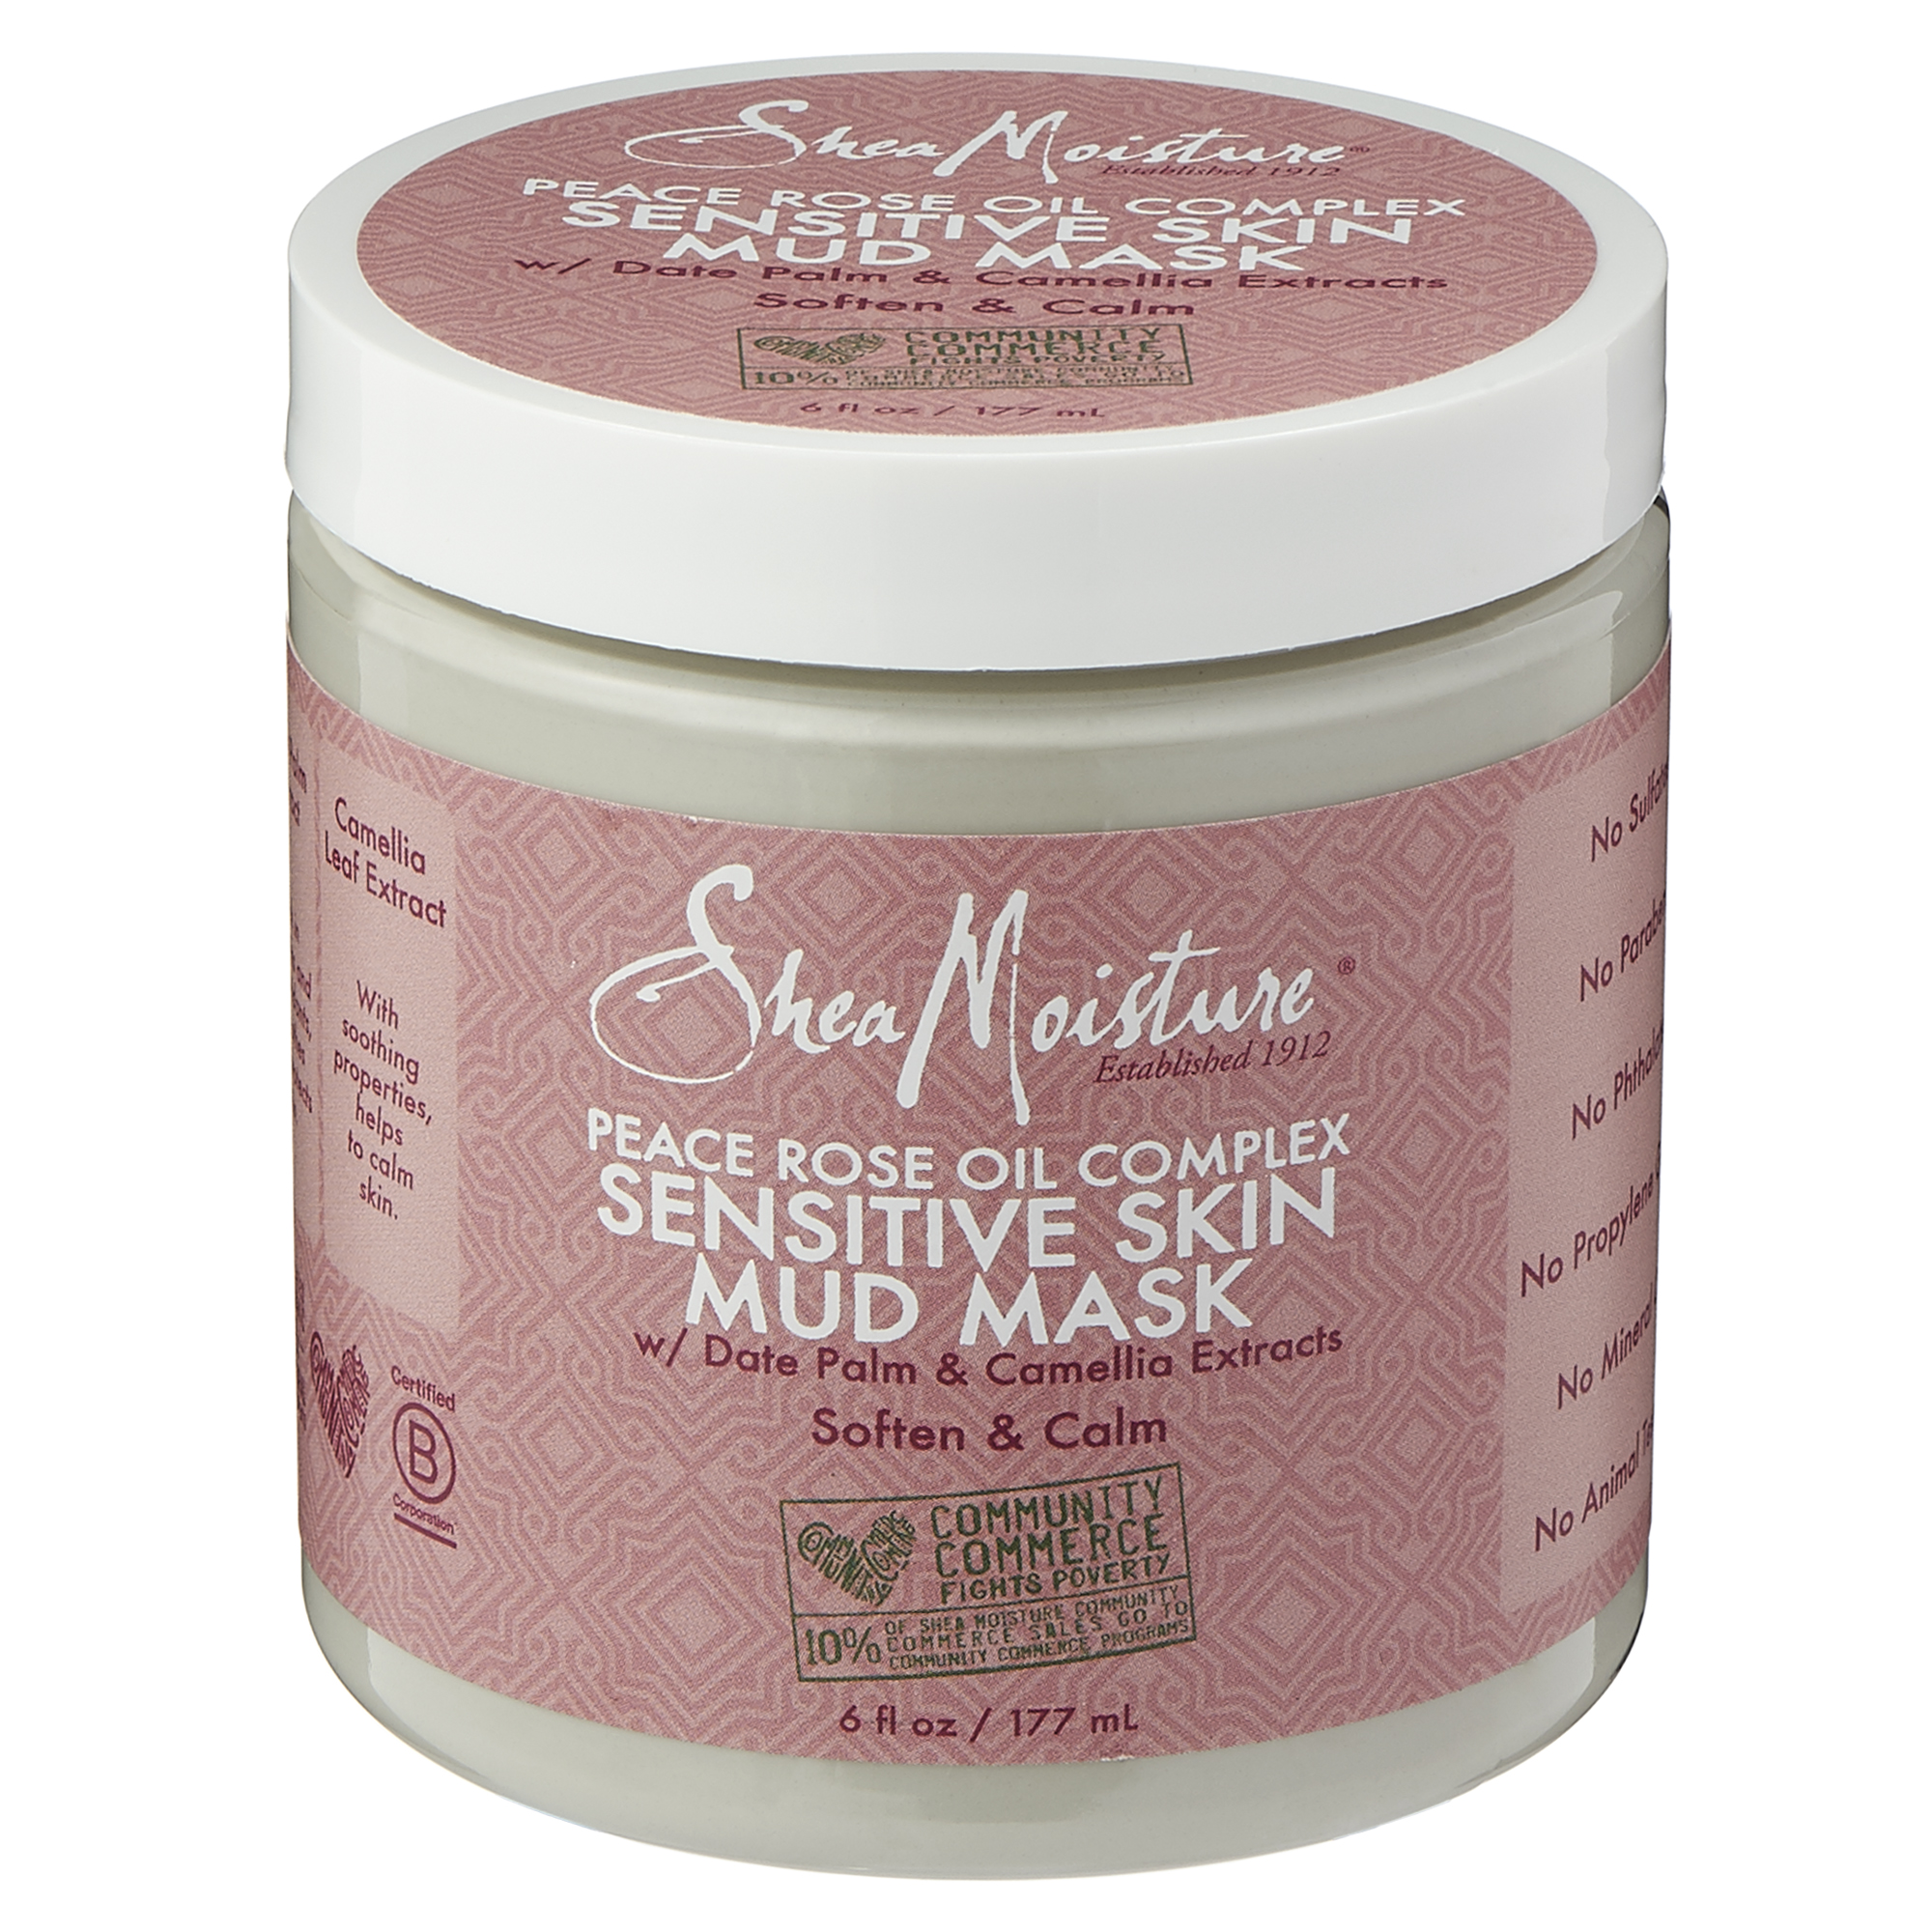 SHEAMOISTURE'S PEACE ROSE OIL COMPLEX SENSITIVE SKIN MUD MASK W/ DATE PALM AND CAMELLIA EXTRACTS by Sundial Brands